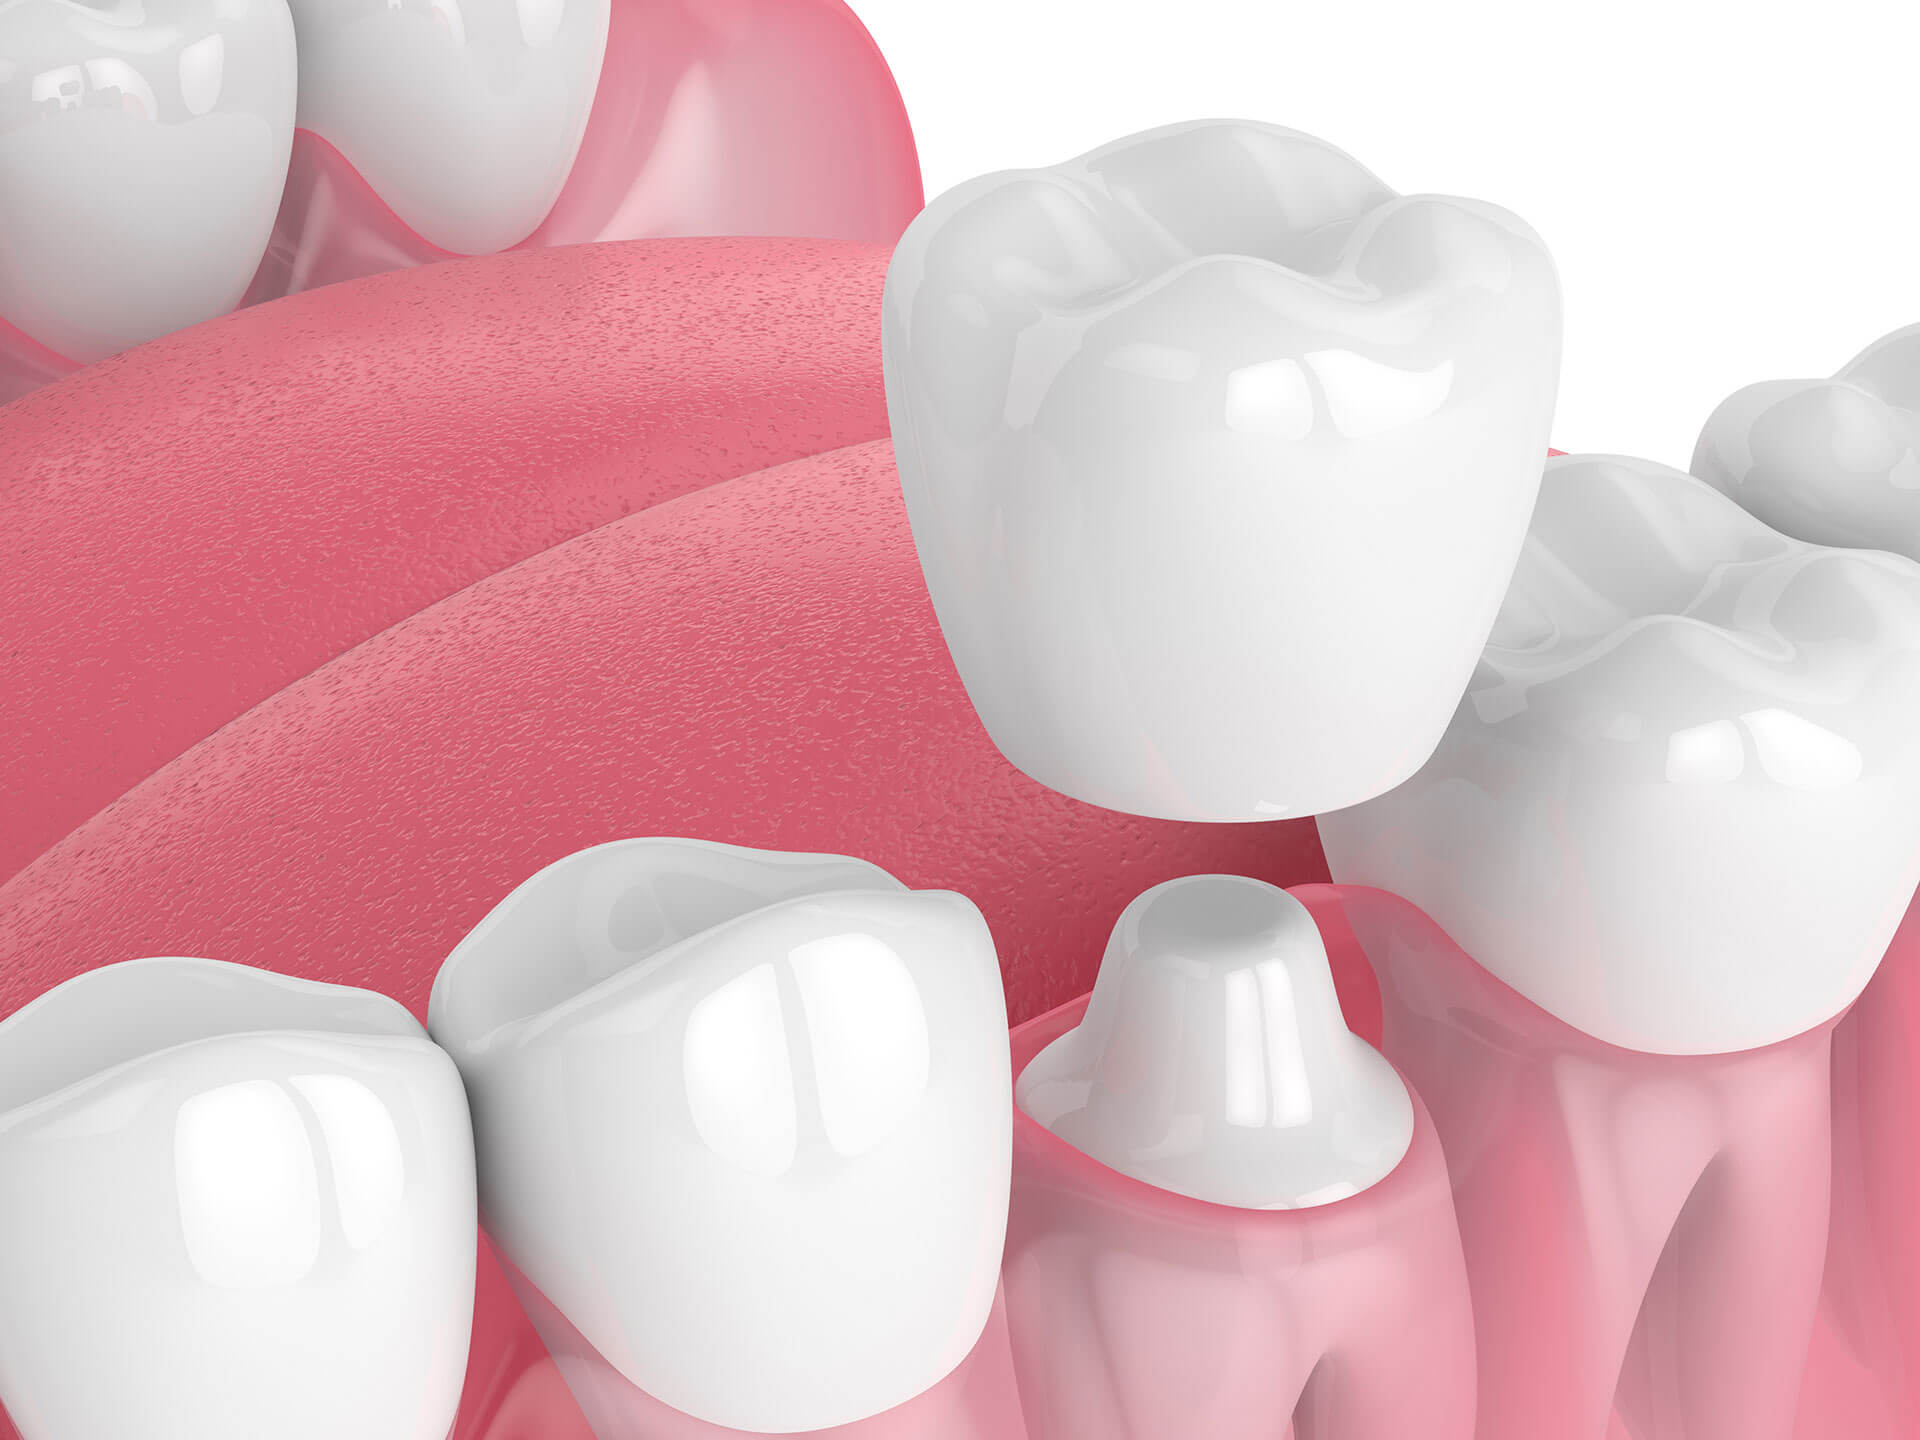 What Should You Do About A Temporary Dental Filling Emergency In Houston?